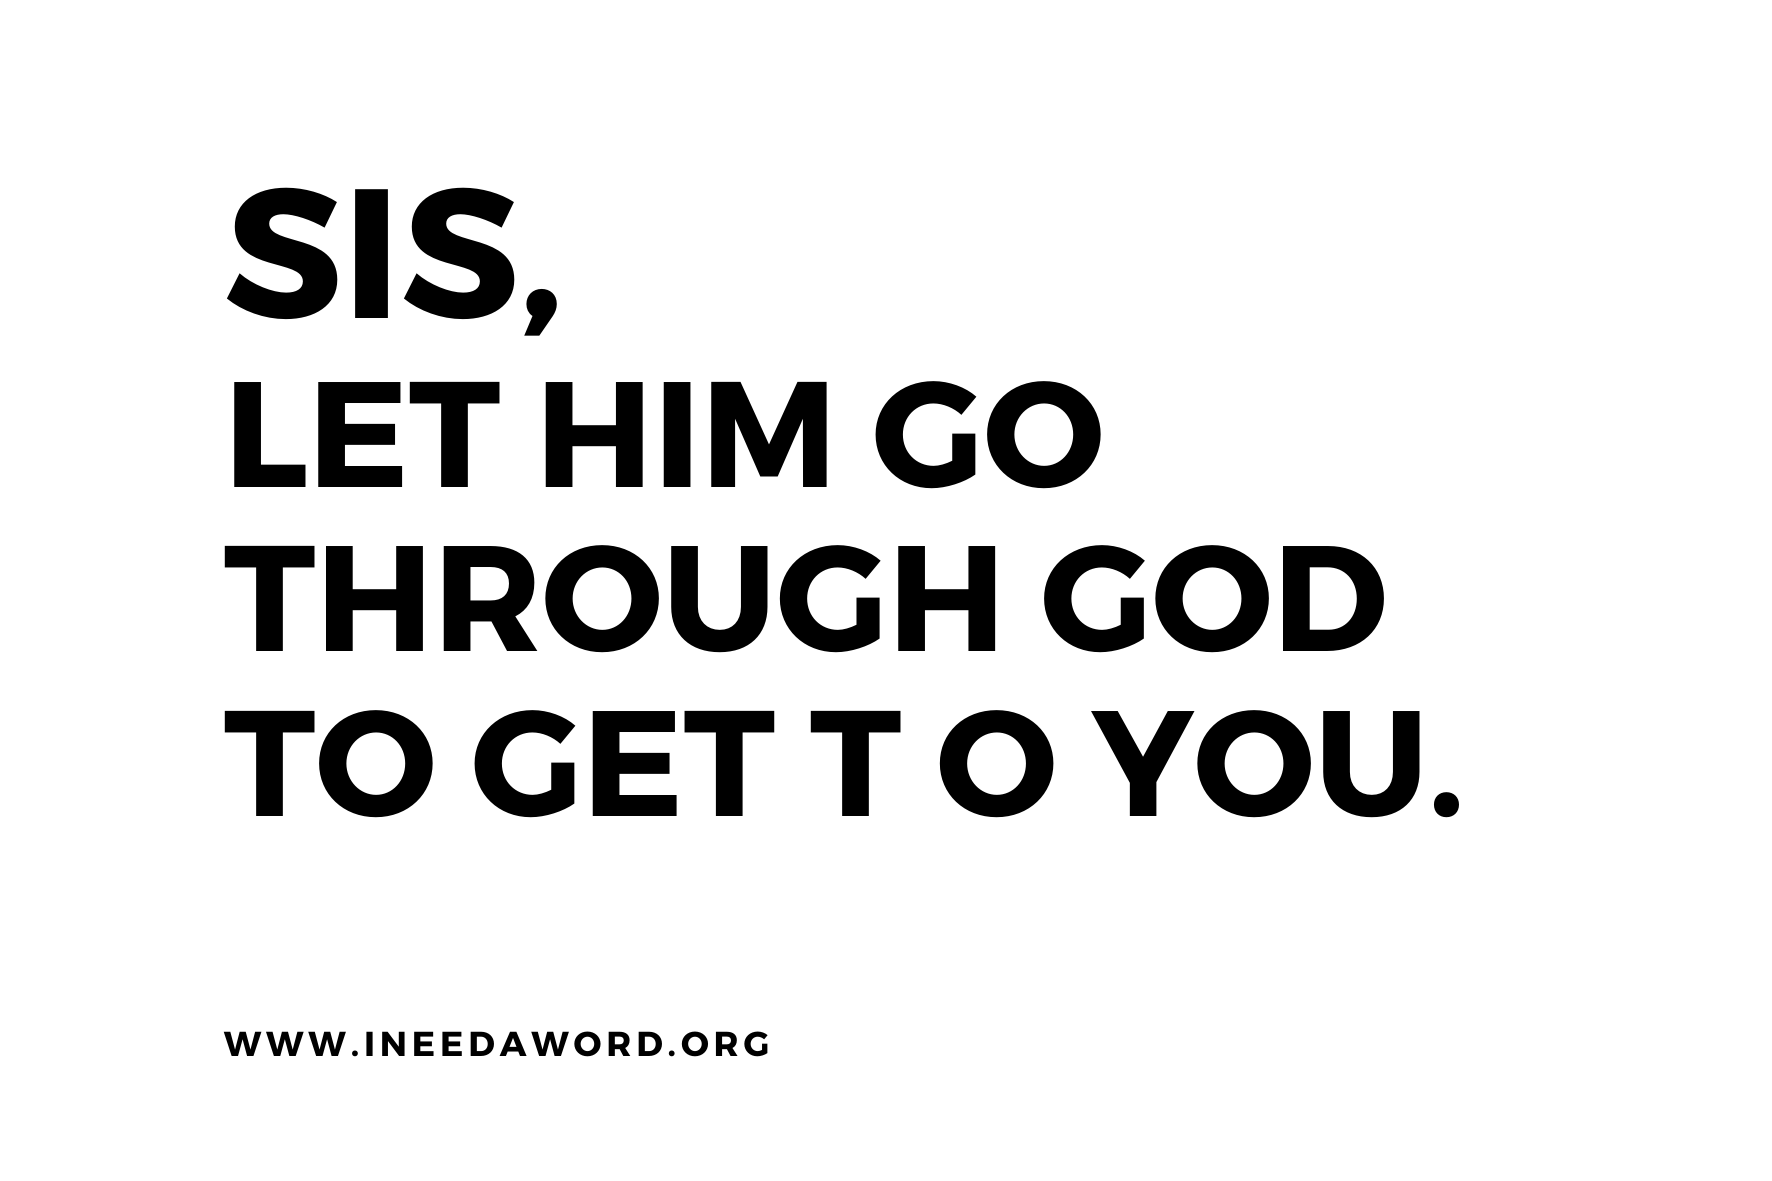 Sis, Let him go through God to get to you!